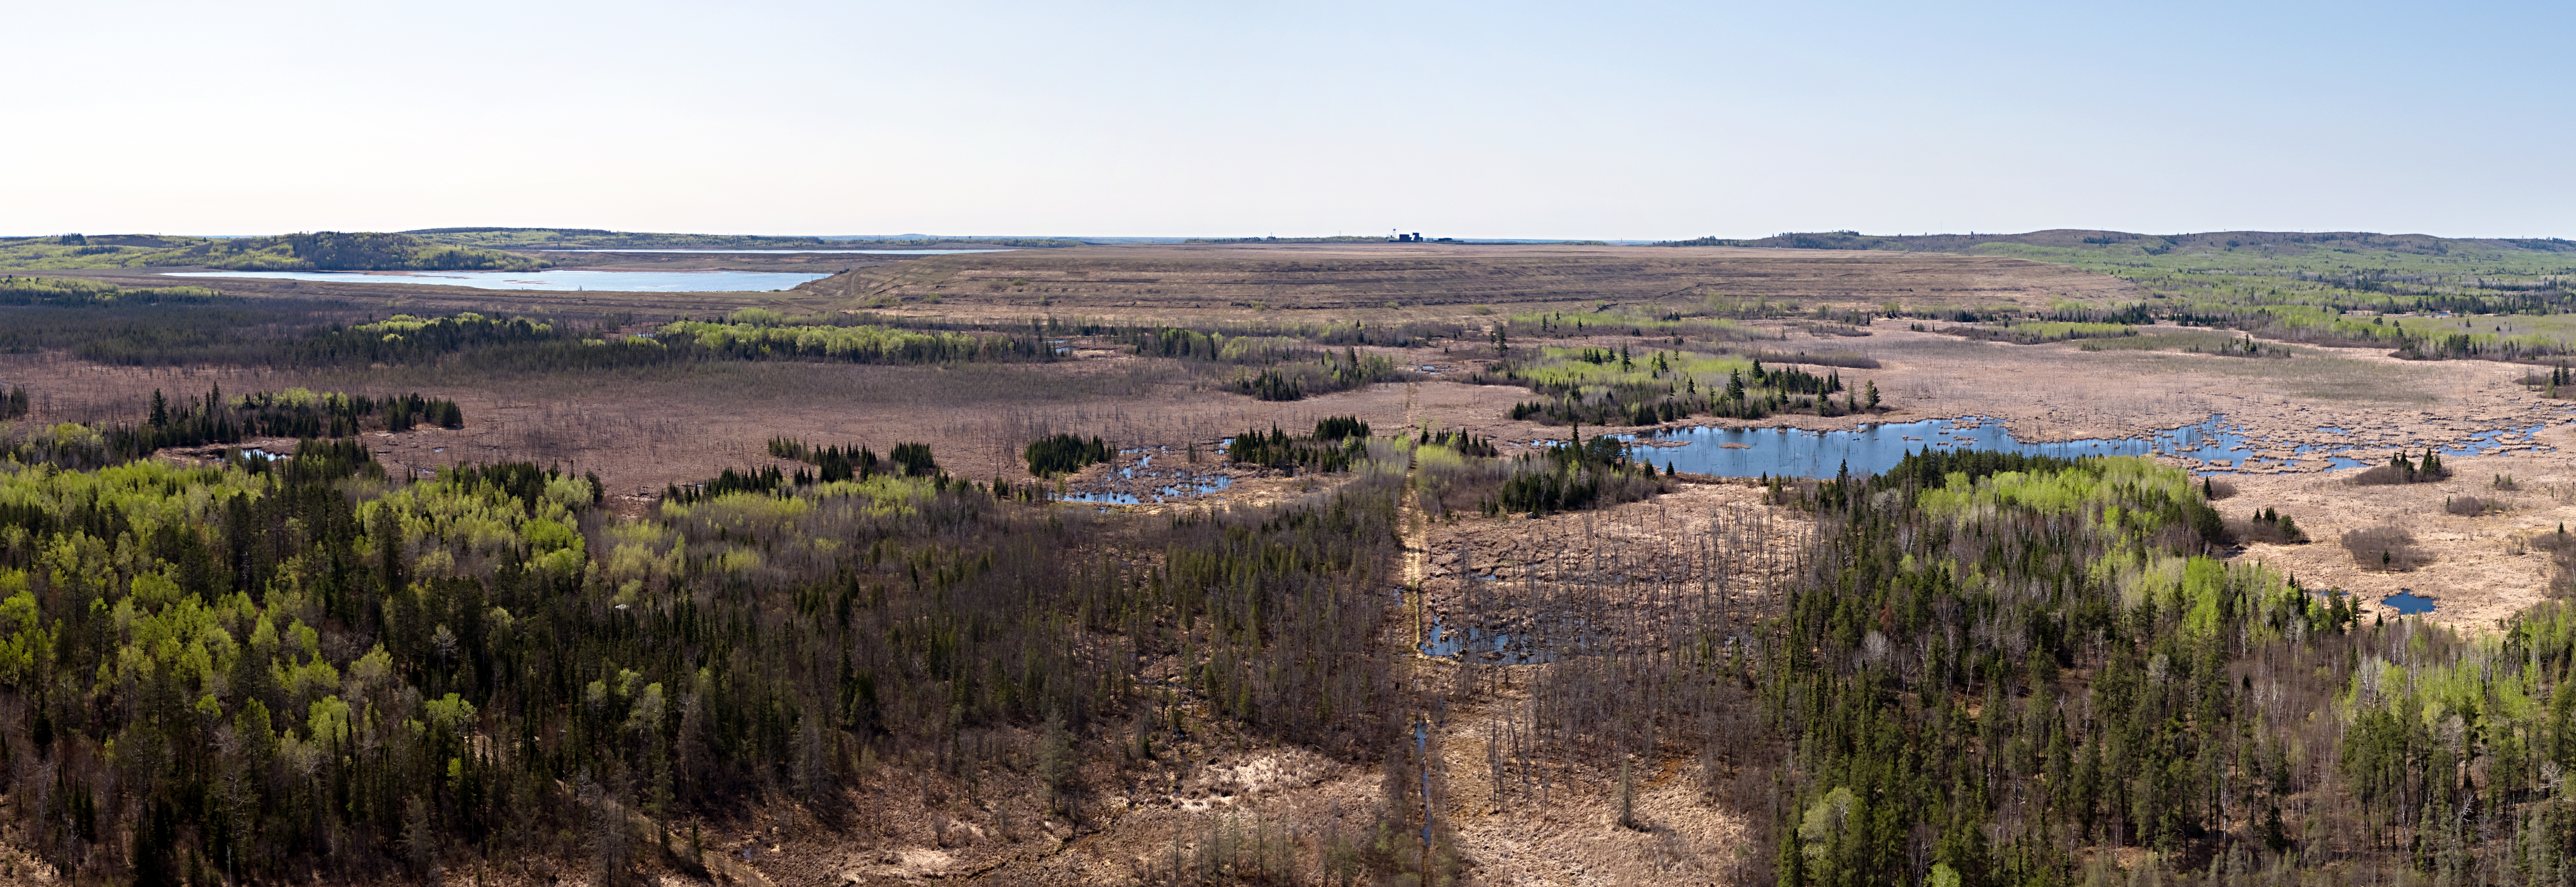 landscape photo showing the north side of the L.T.V. tailings basin site